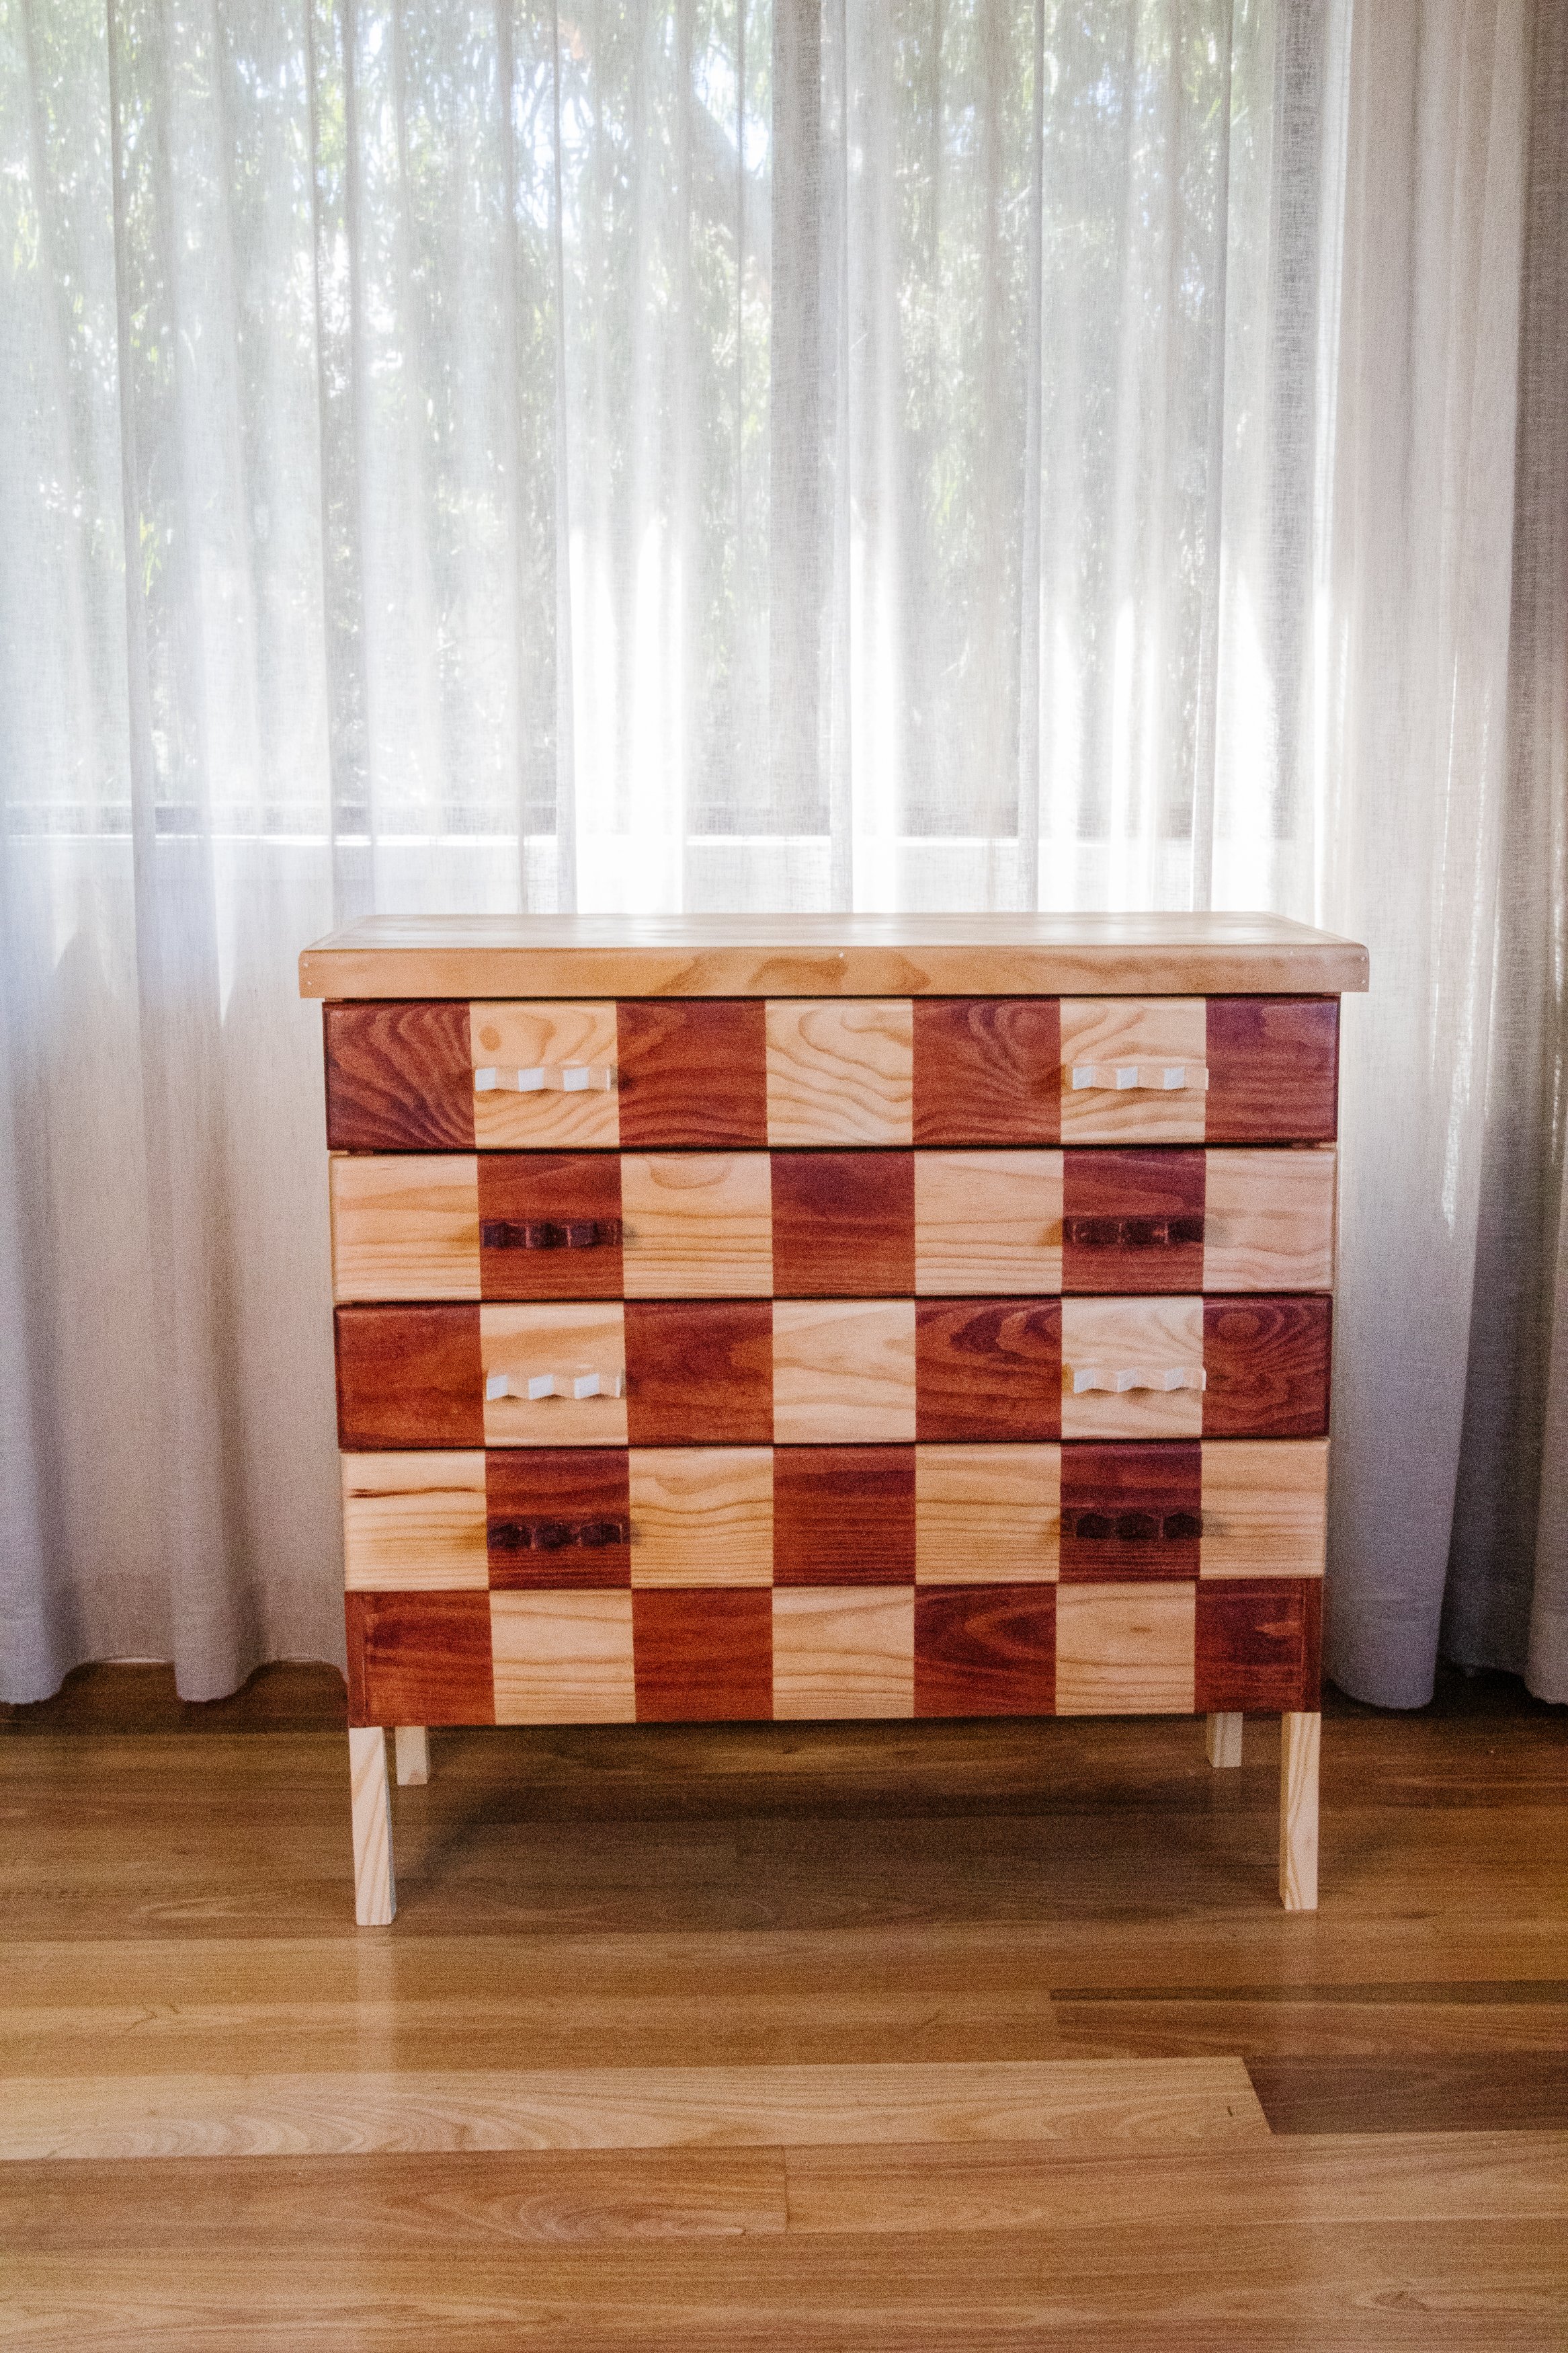 Upcycled Timber Stained Checker Drawers (43 of 79).jpg